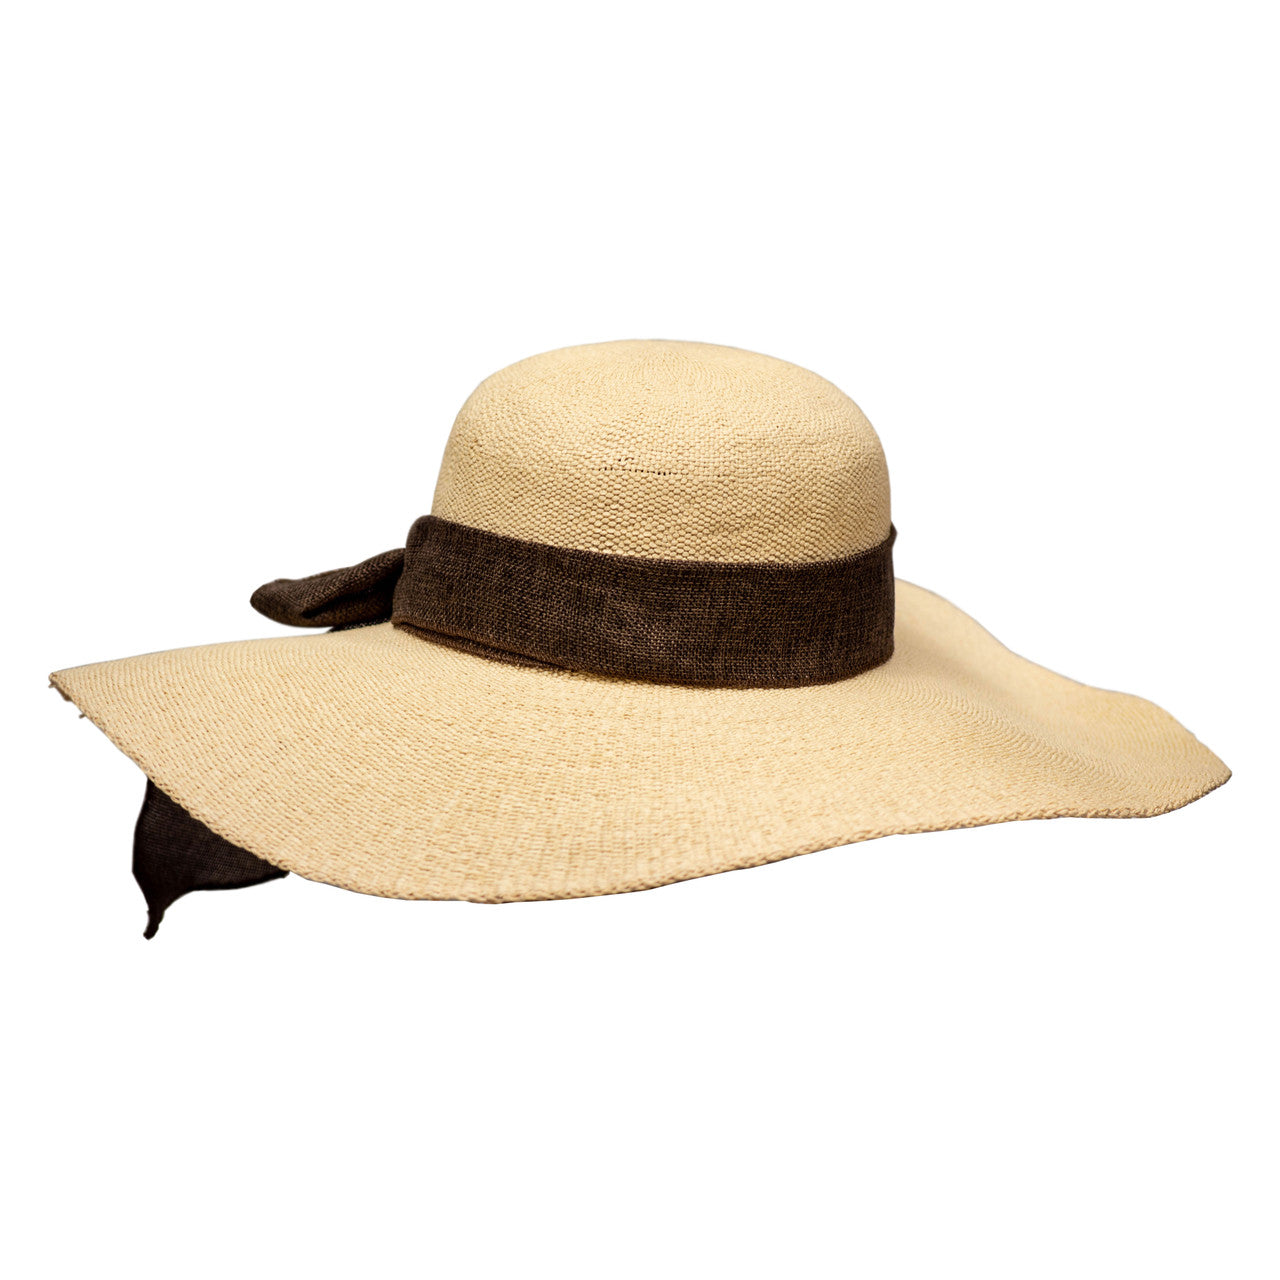 Saint Martin - Wide Brim Hat with Bow (Profile Side)